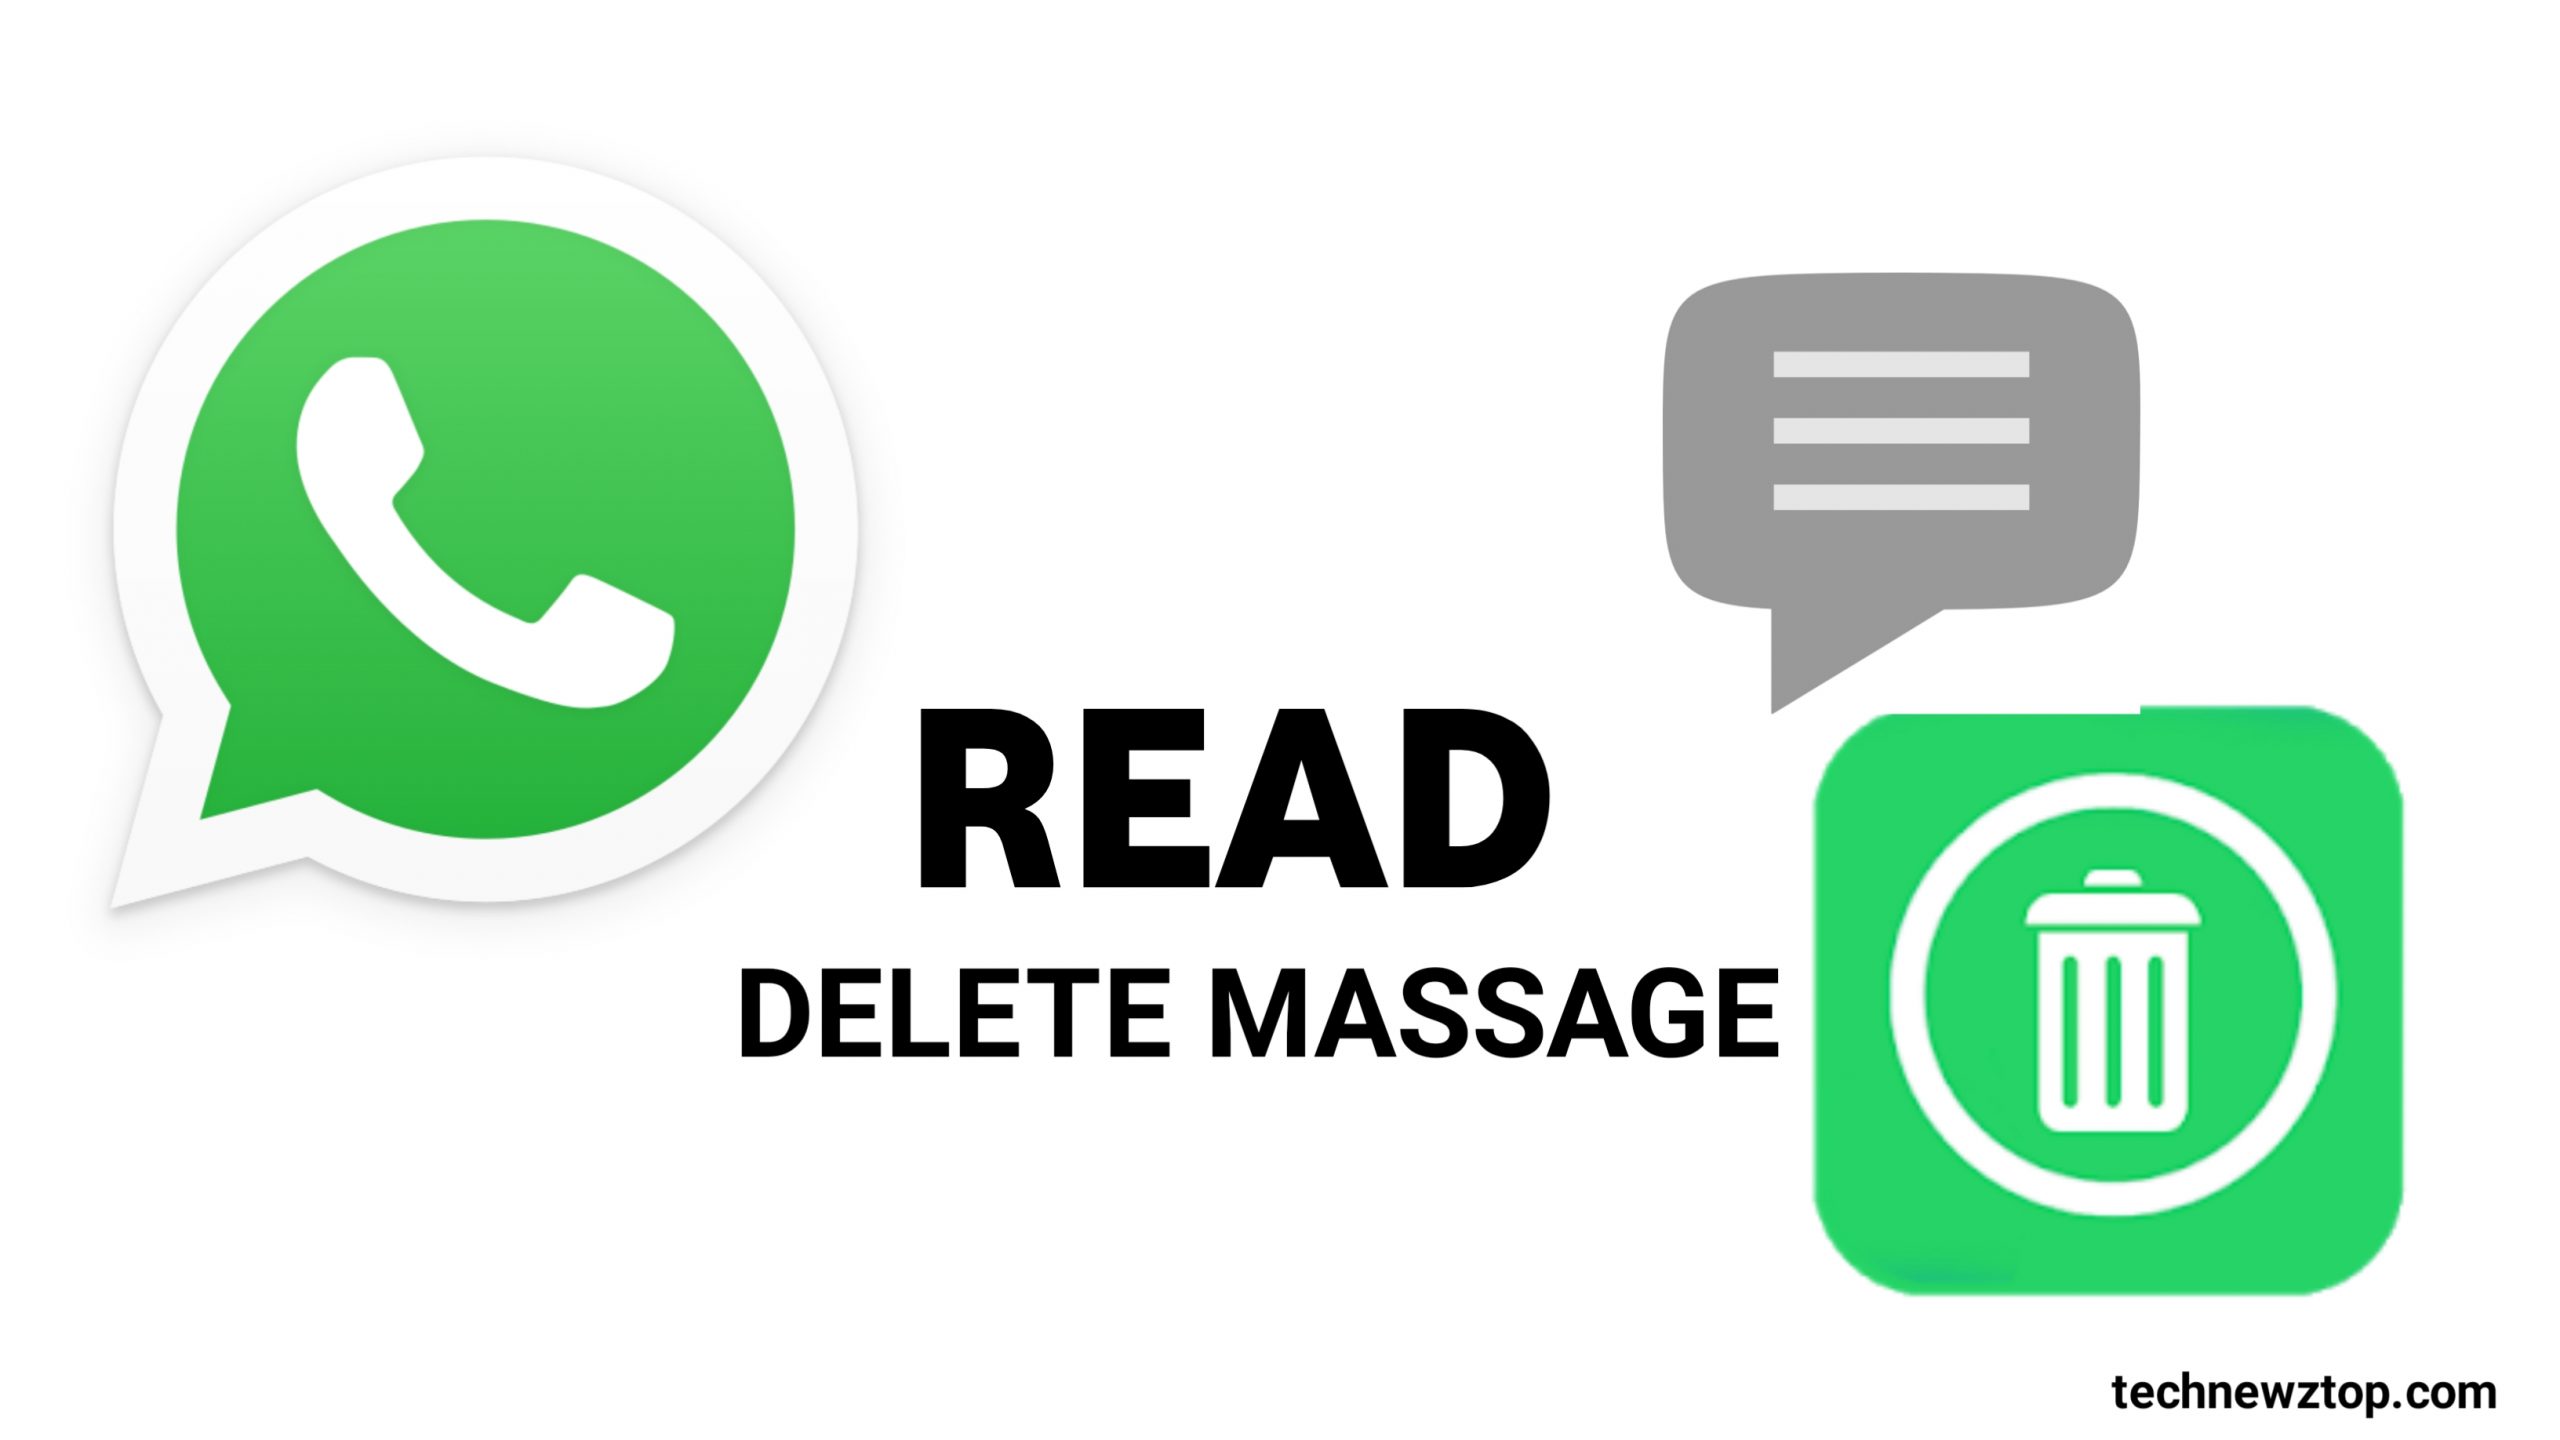 How To Read Deleted Messages on Whatsapp Best Android App 2020.